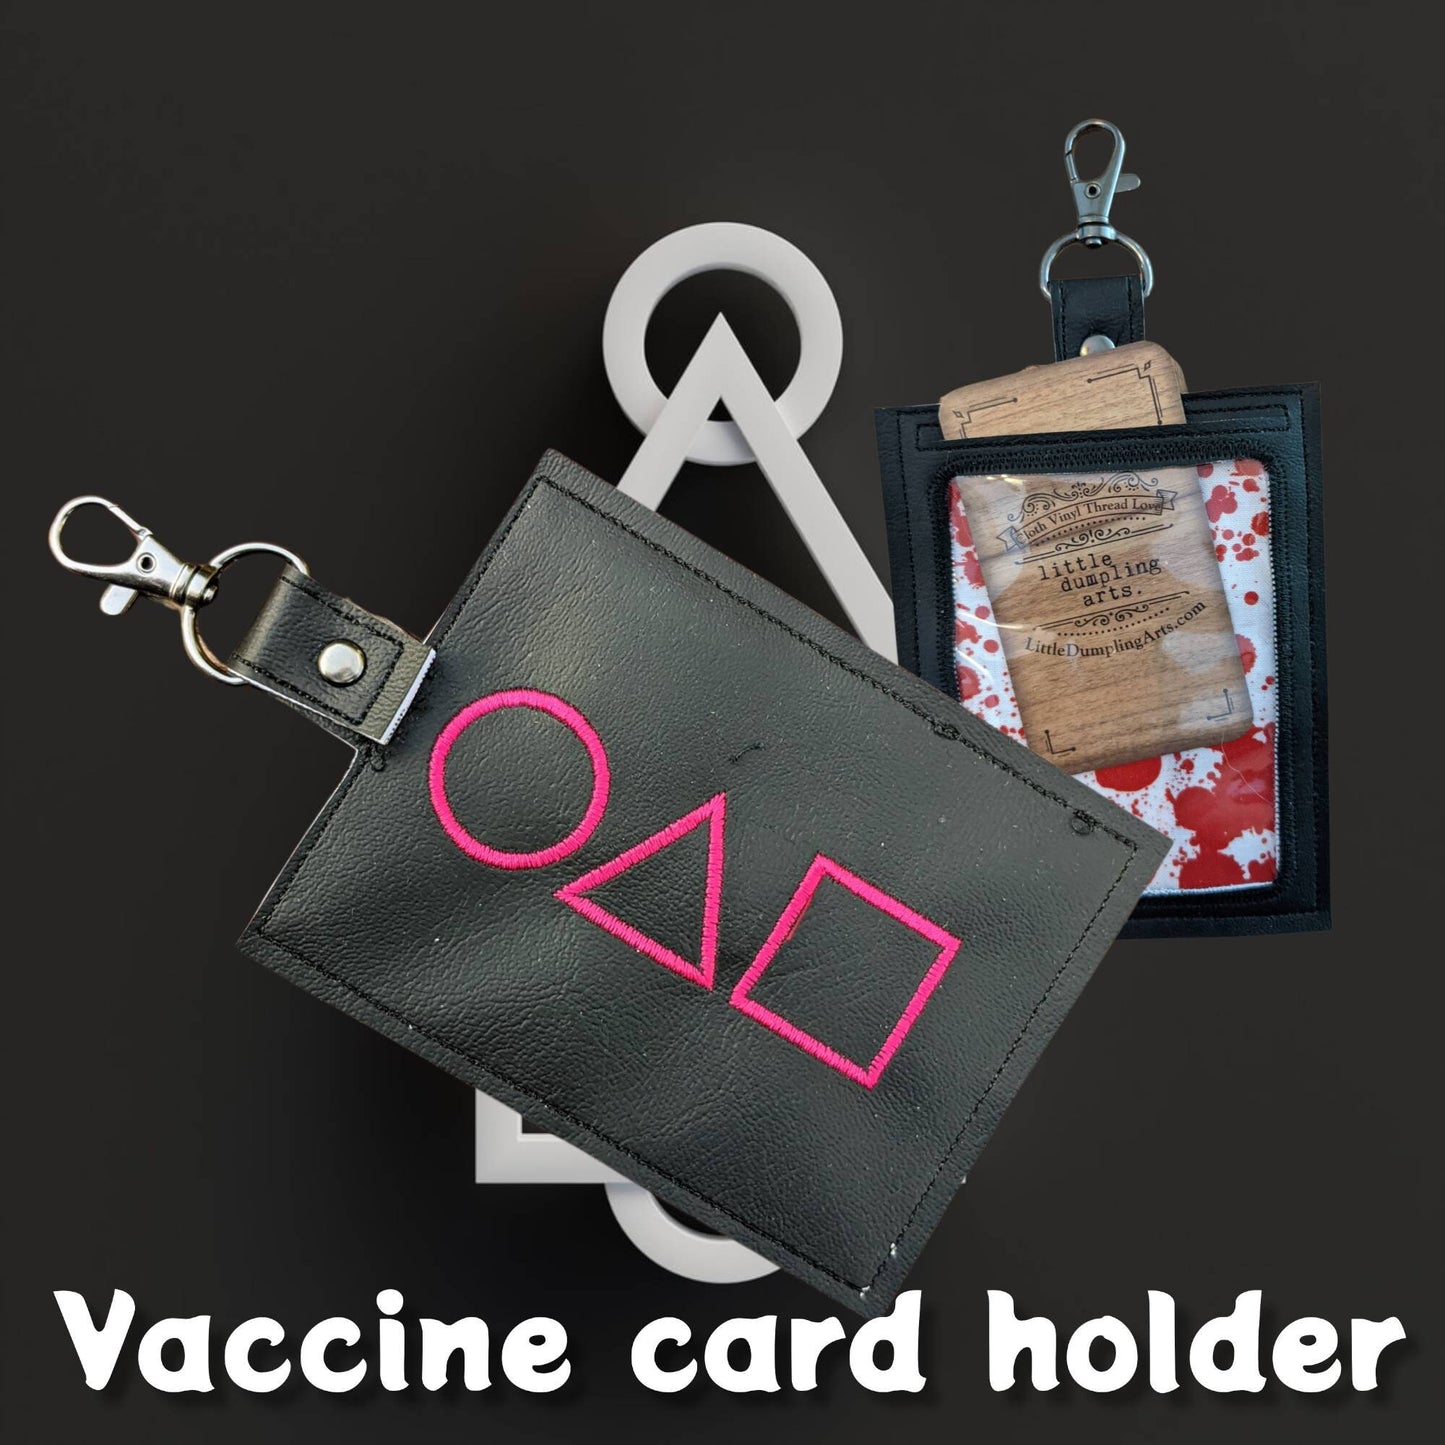 Cephalopod game vaccination card protector. Space for valuables. Attach to purse, bag, backback or beltloops